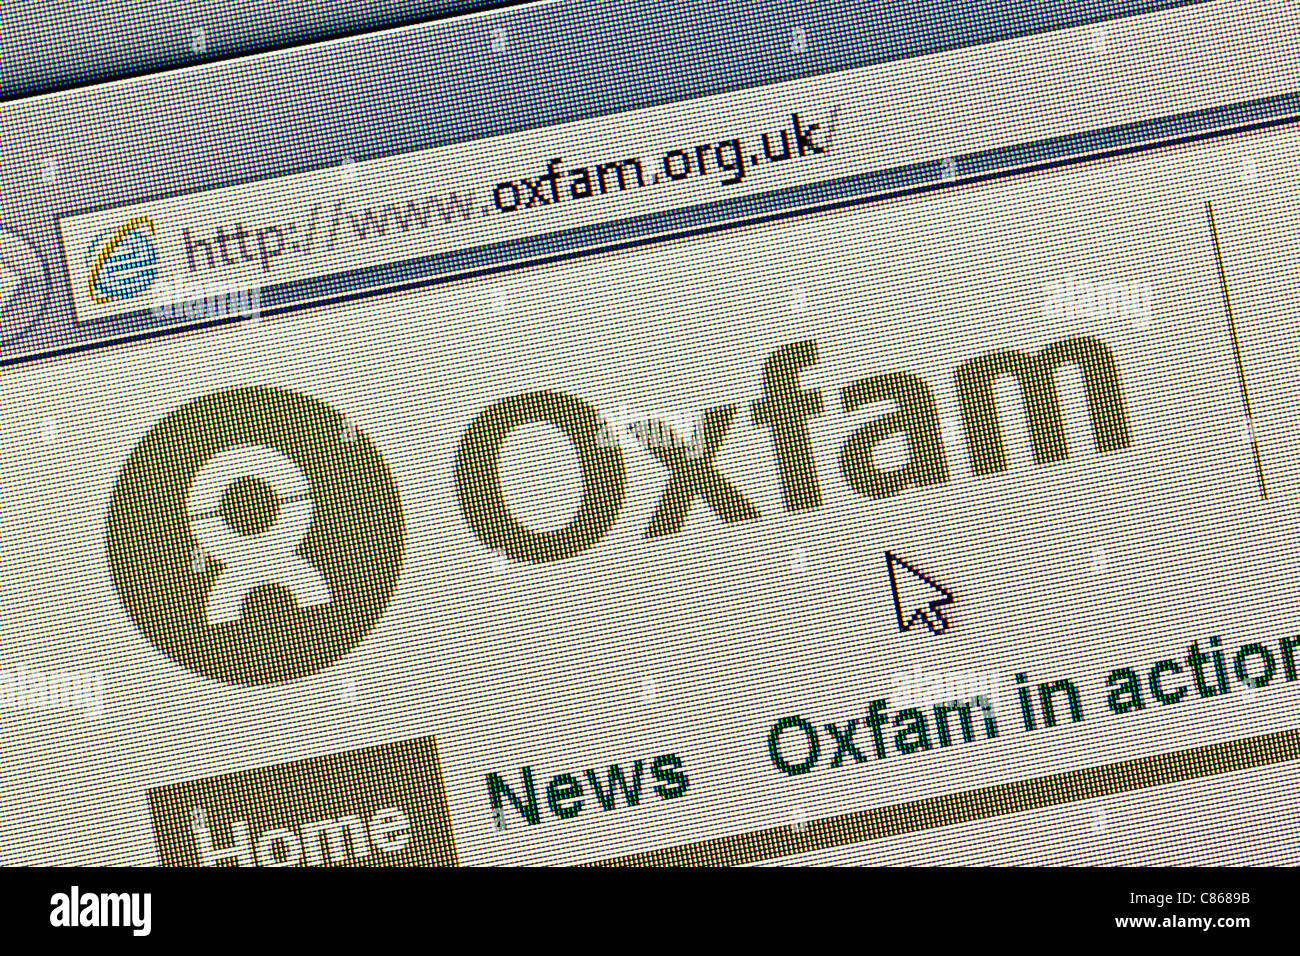 Oxfam logo and website close up Stock Photo